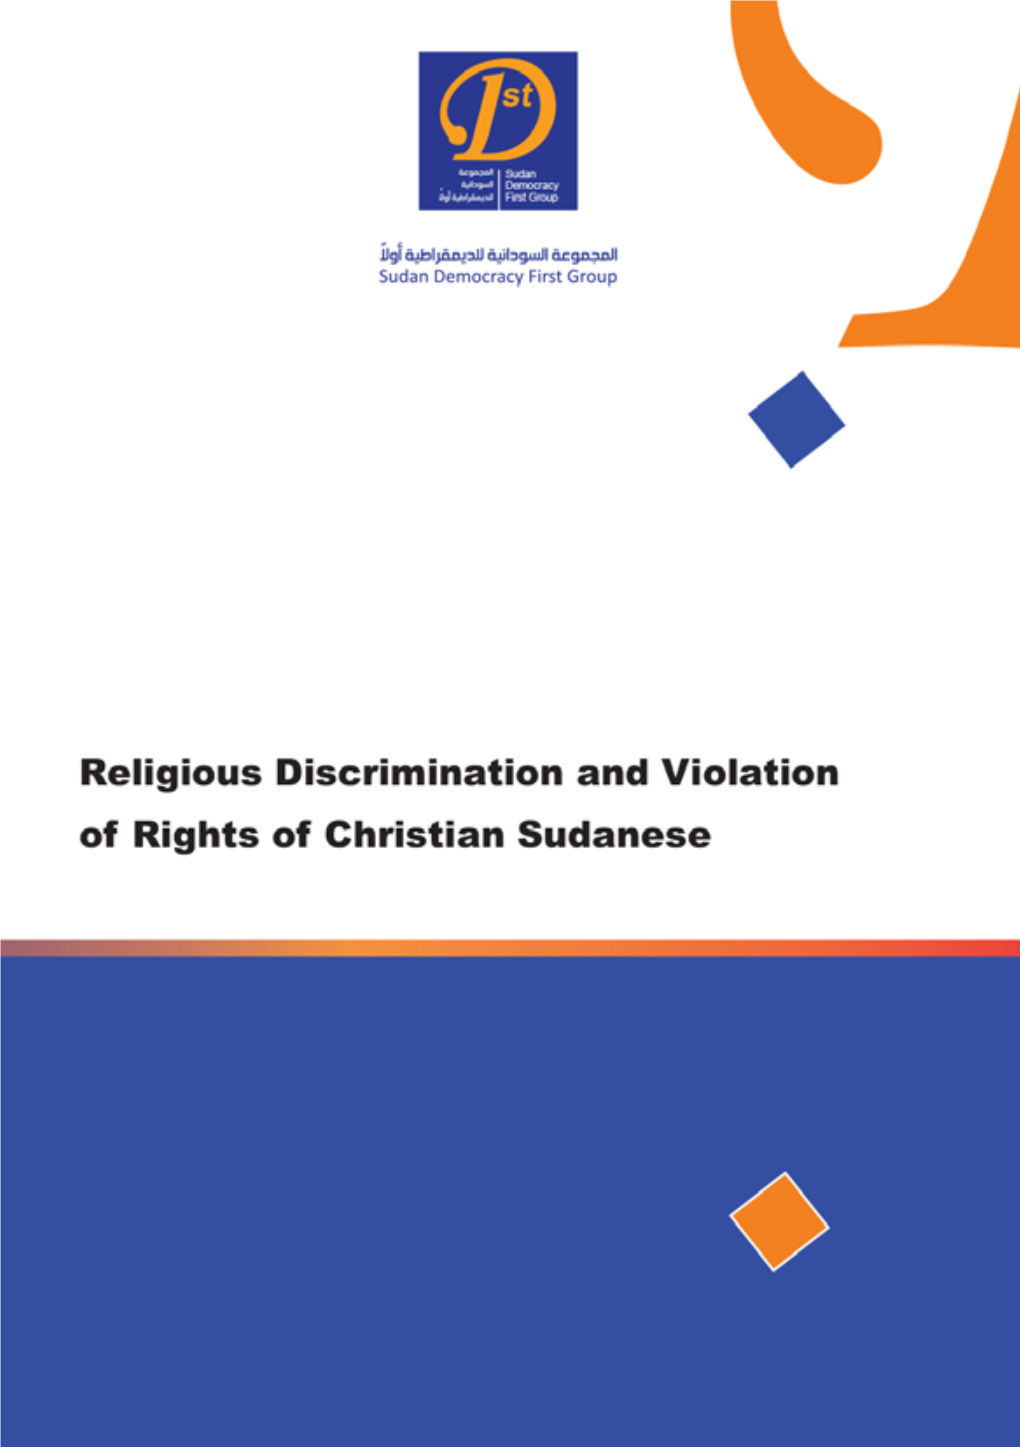 Discrimination and Violation of Rights of Christian Sudanese